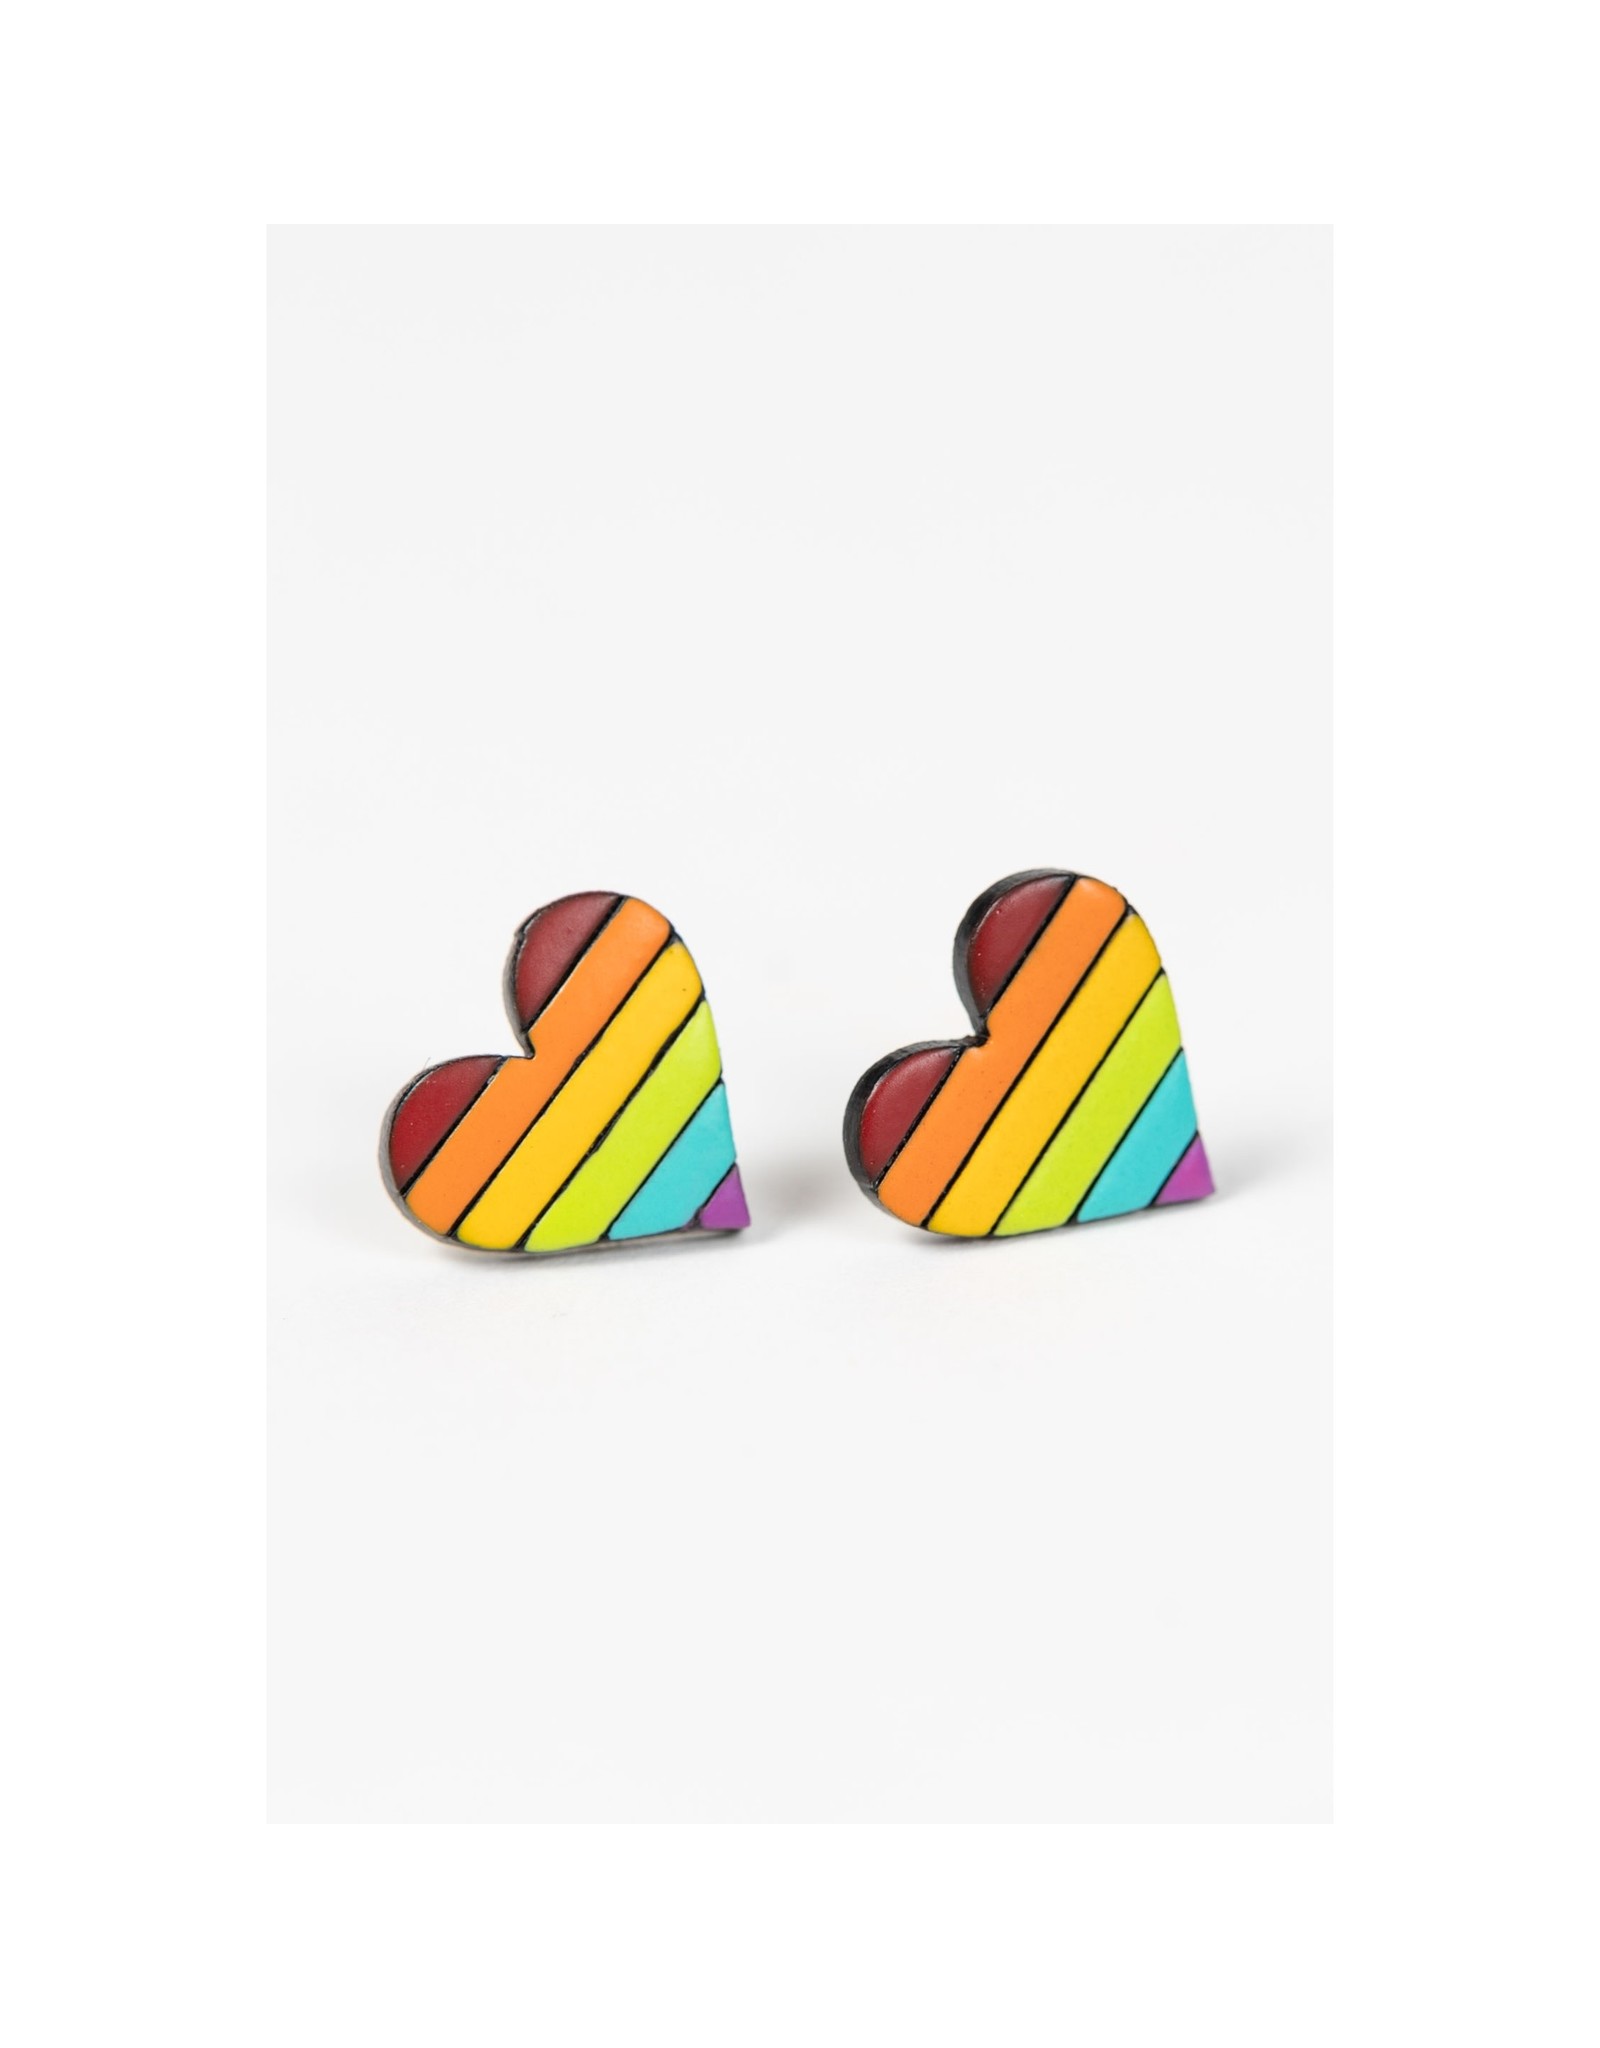 Trade roots Rainbow Heart Gourd Earrings, Colombia